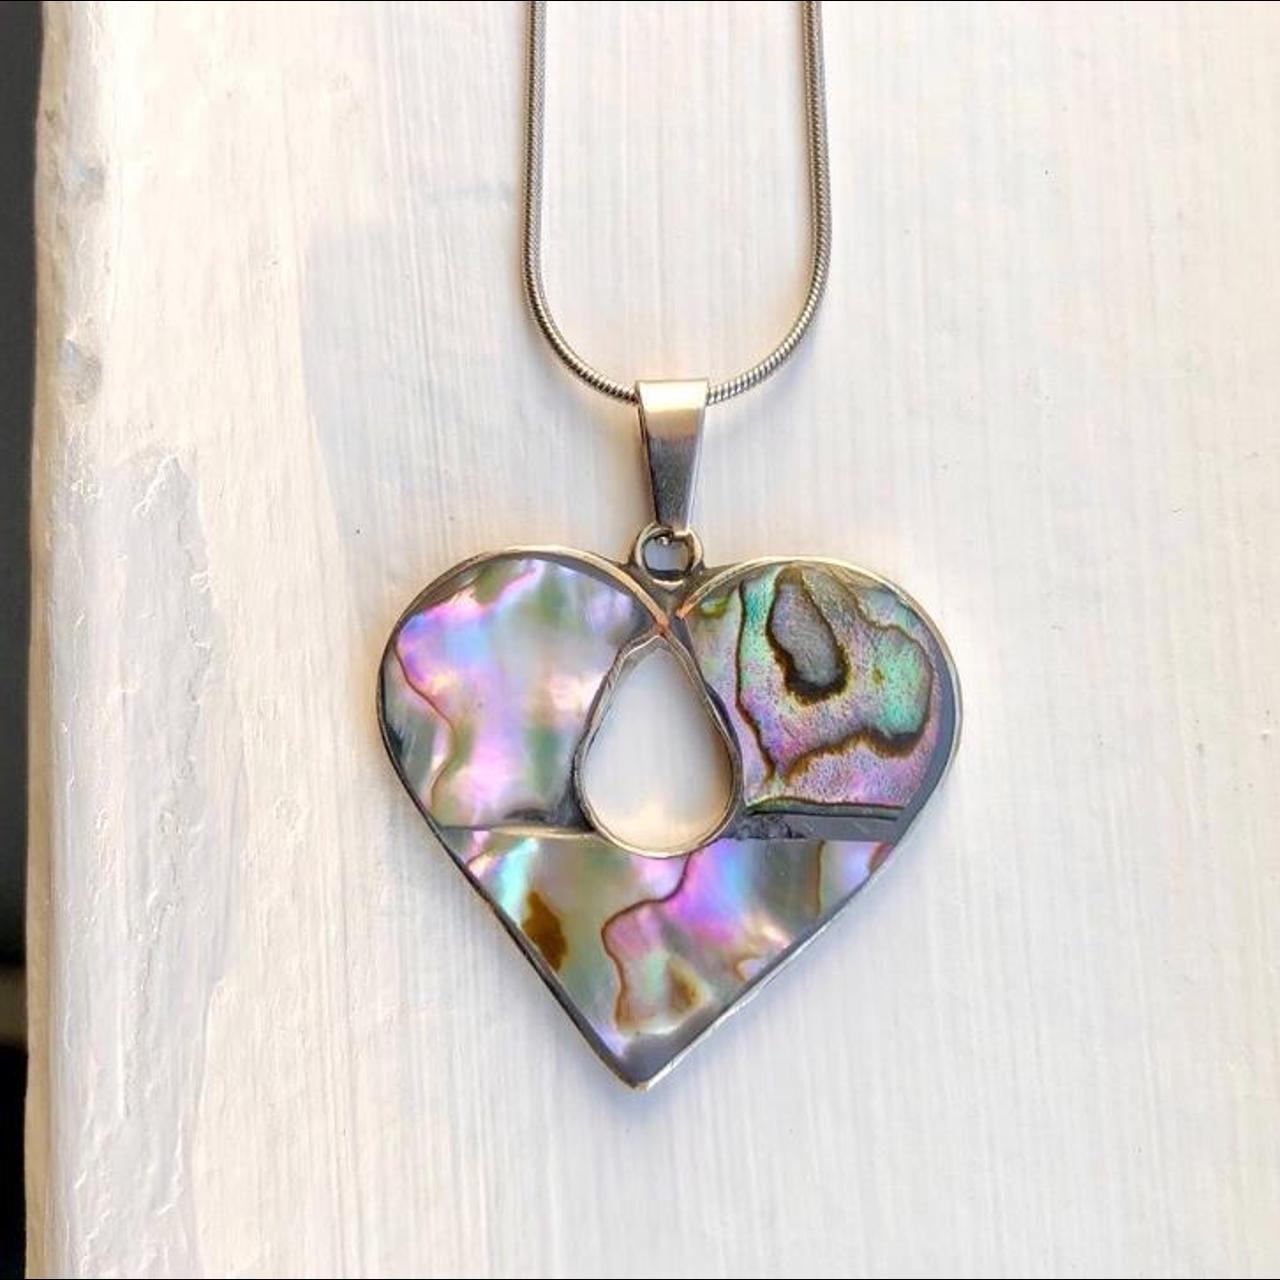 Update more than 148 abalone heart necklace